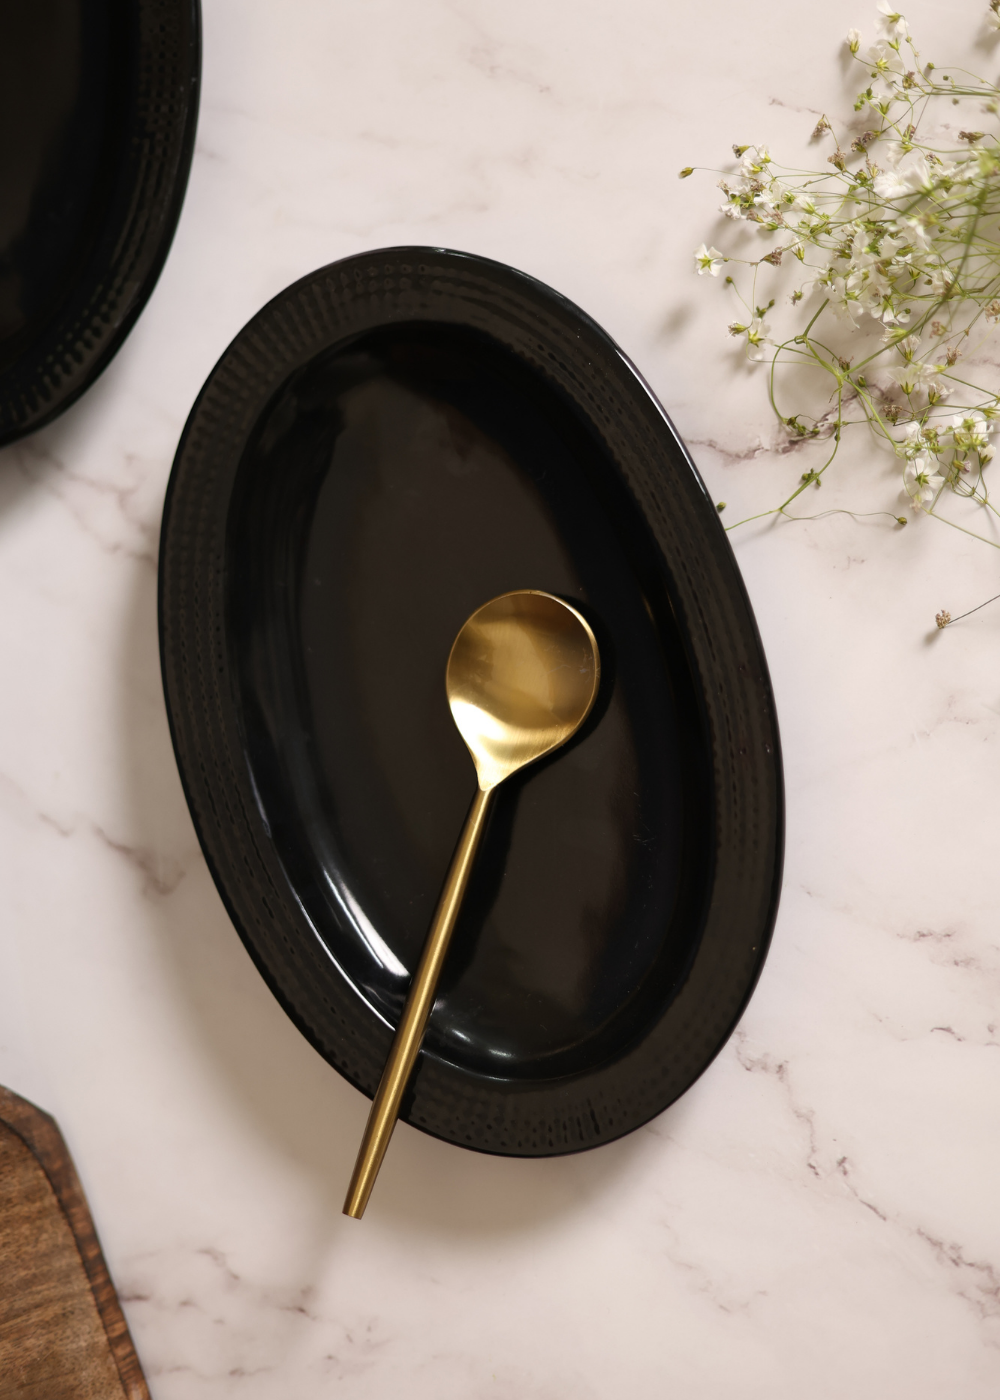 Black oval bowl with golden spoon